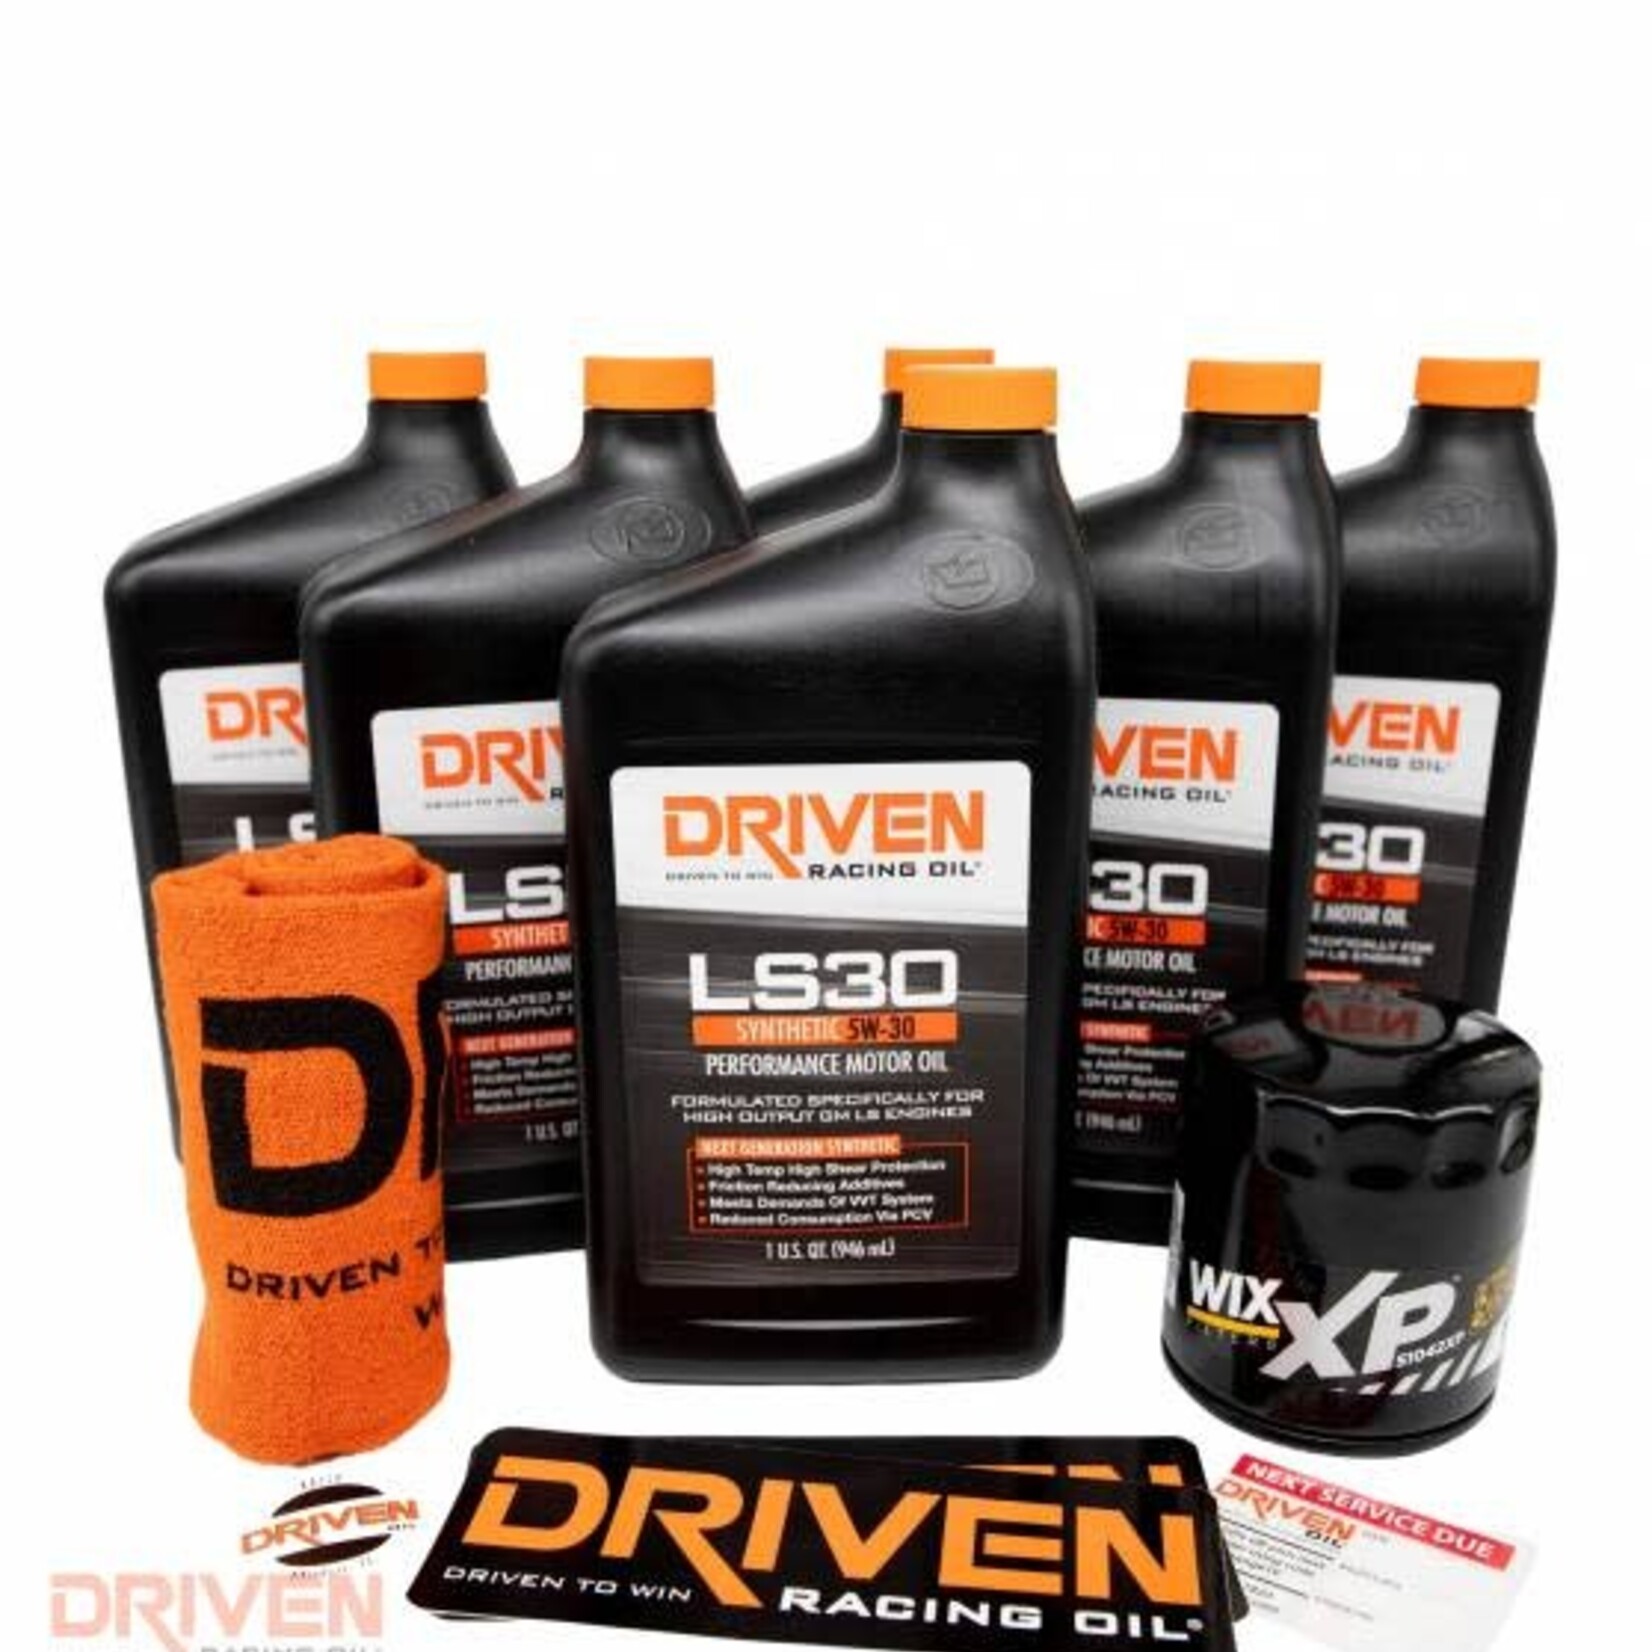 DRIVEN DRIVEN RACING OIL LS30 Oil Change Kit for Gen III GM Engines (1997-2006) w/ 6 Qt Oil Capacity